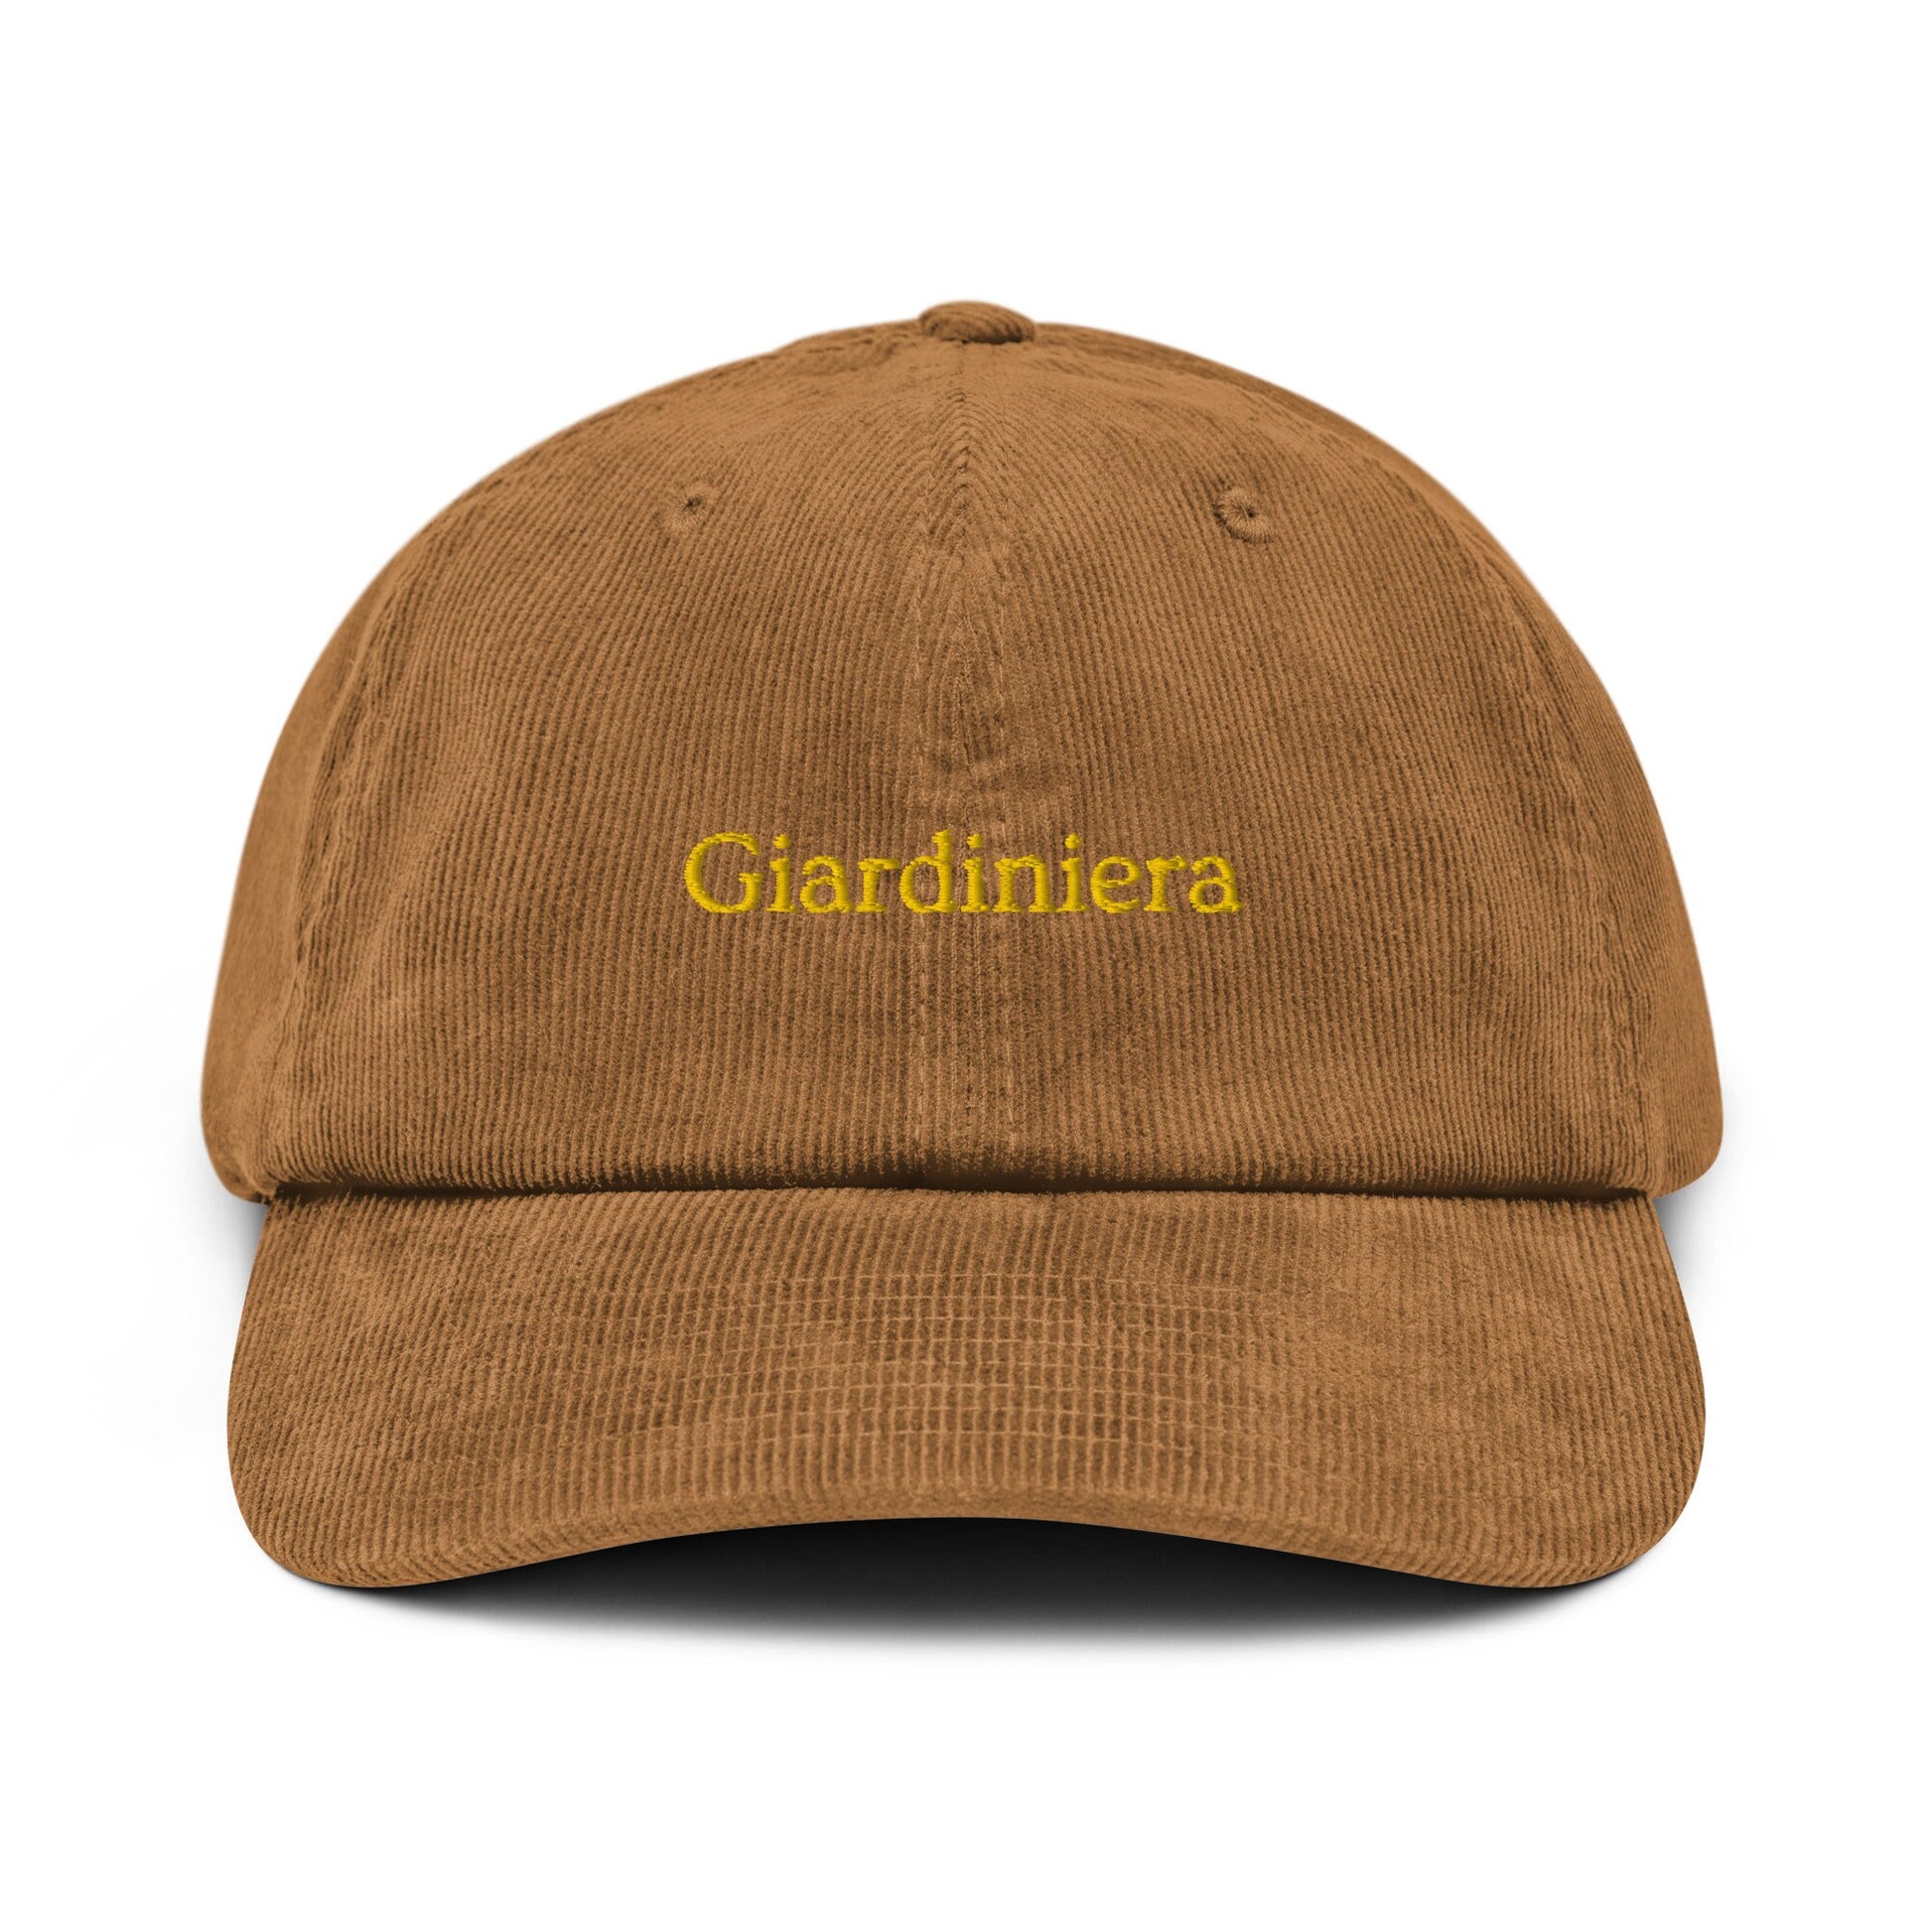 Giardiniera Corduroy Dad Hat - Gift for Italian charcuterie and cheese food Lovers - Handmade Embroidered Cap